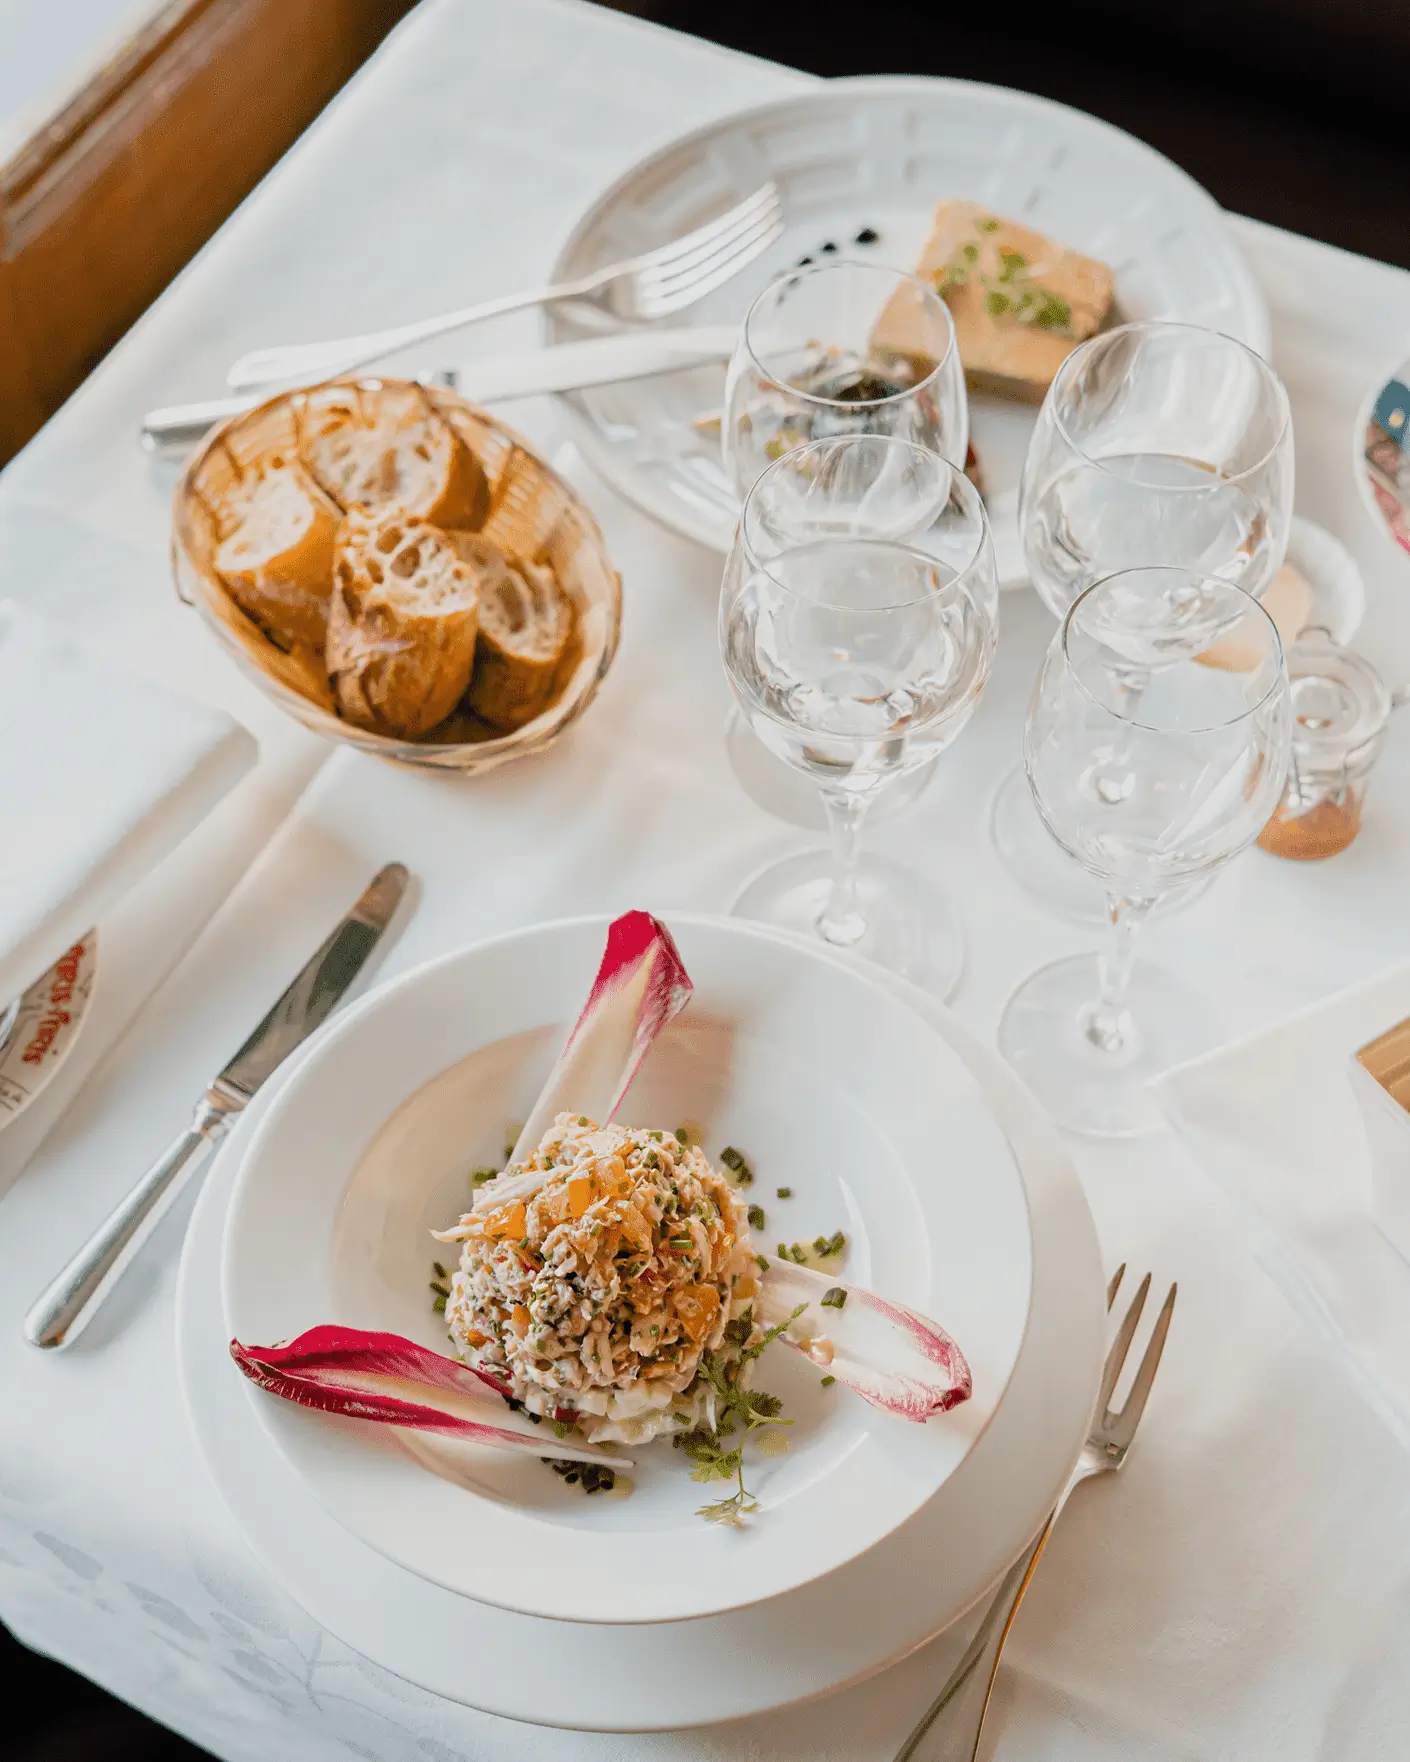 Elegant dining setup at Chez Georges with white linen-covered tables, polished glassware, and wooden bistro chairs, embodying the quintessential Parisian bistro experience.